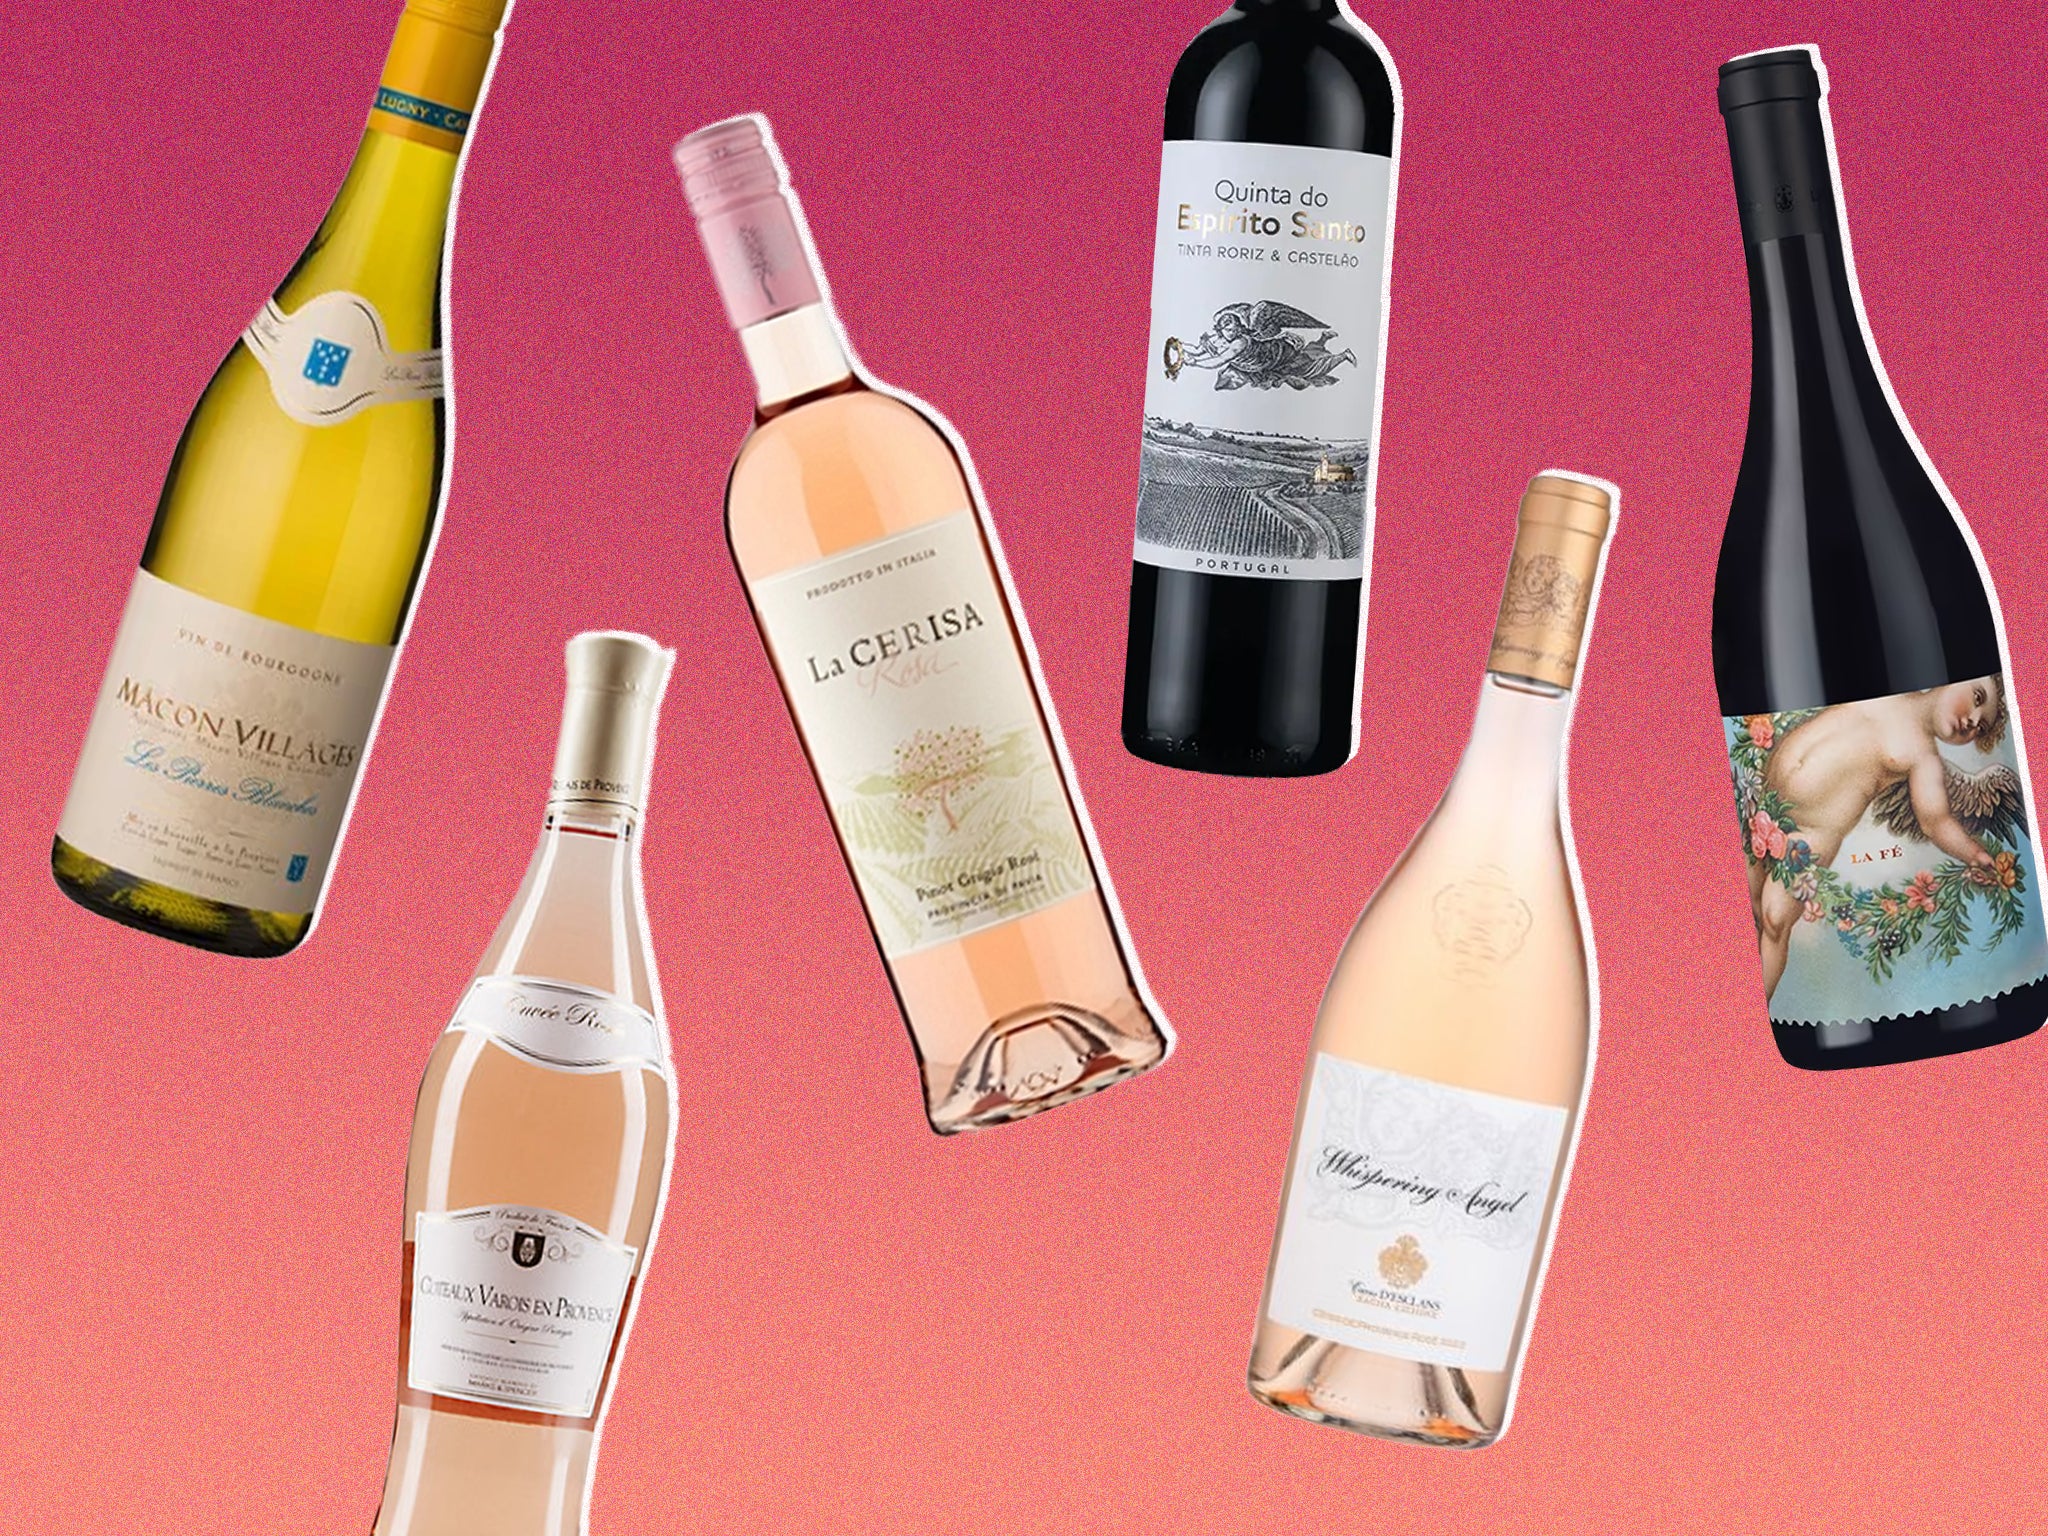 Best wine deals to sip and save on this month